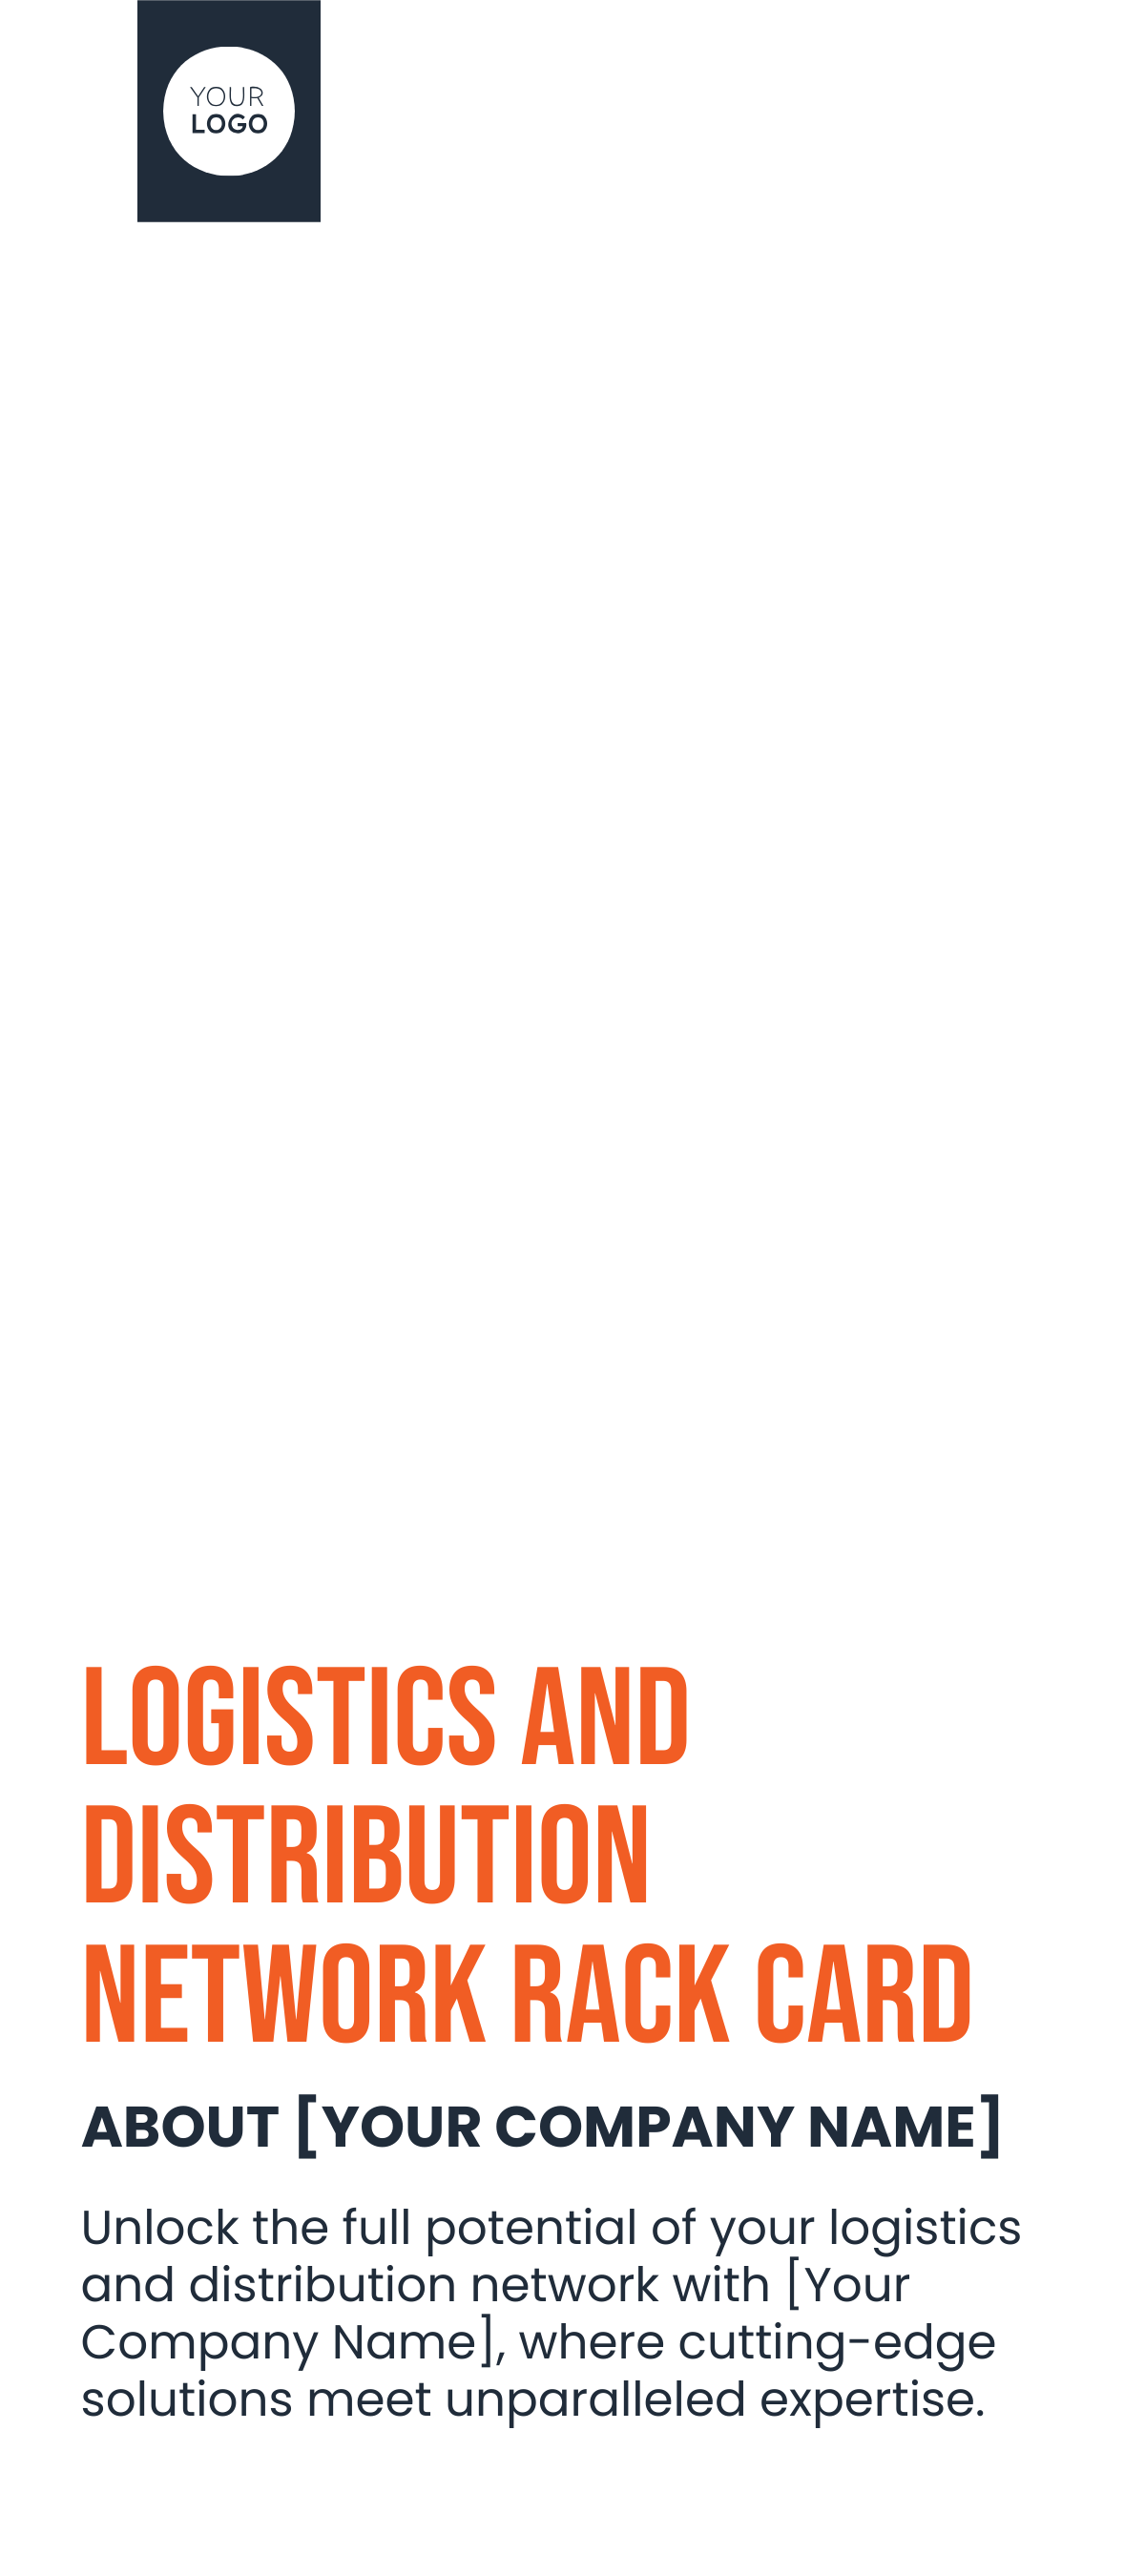 Logistics and Distribution Network Rack Card Template